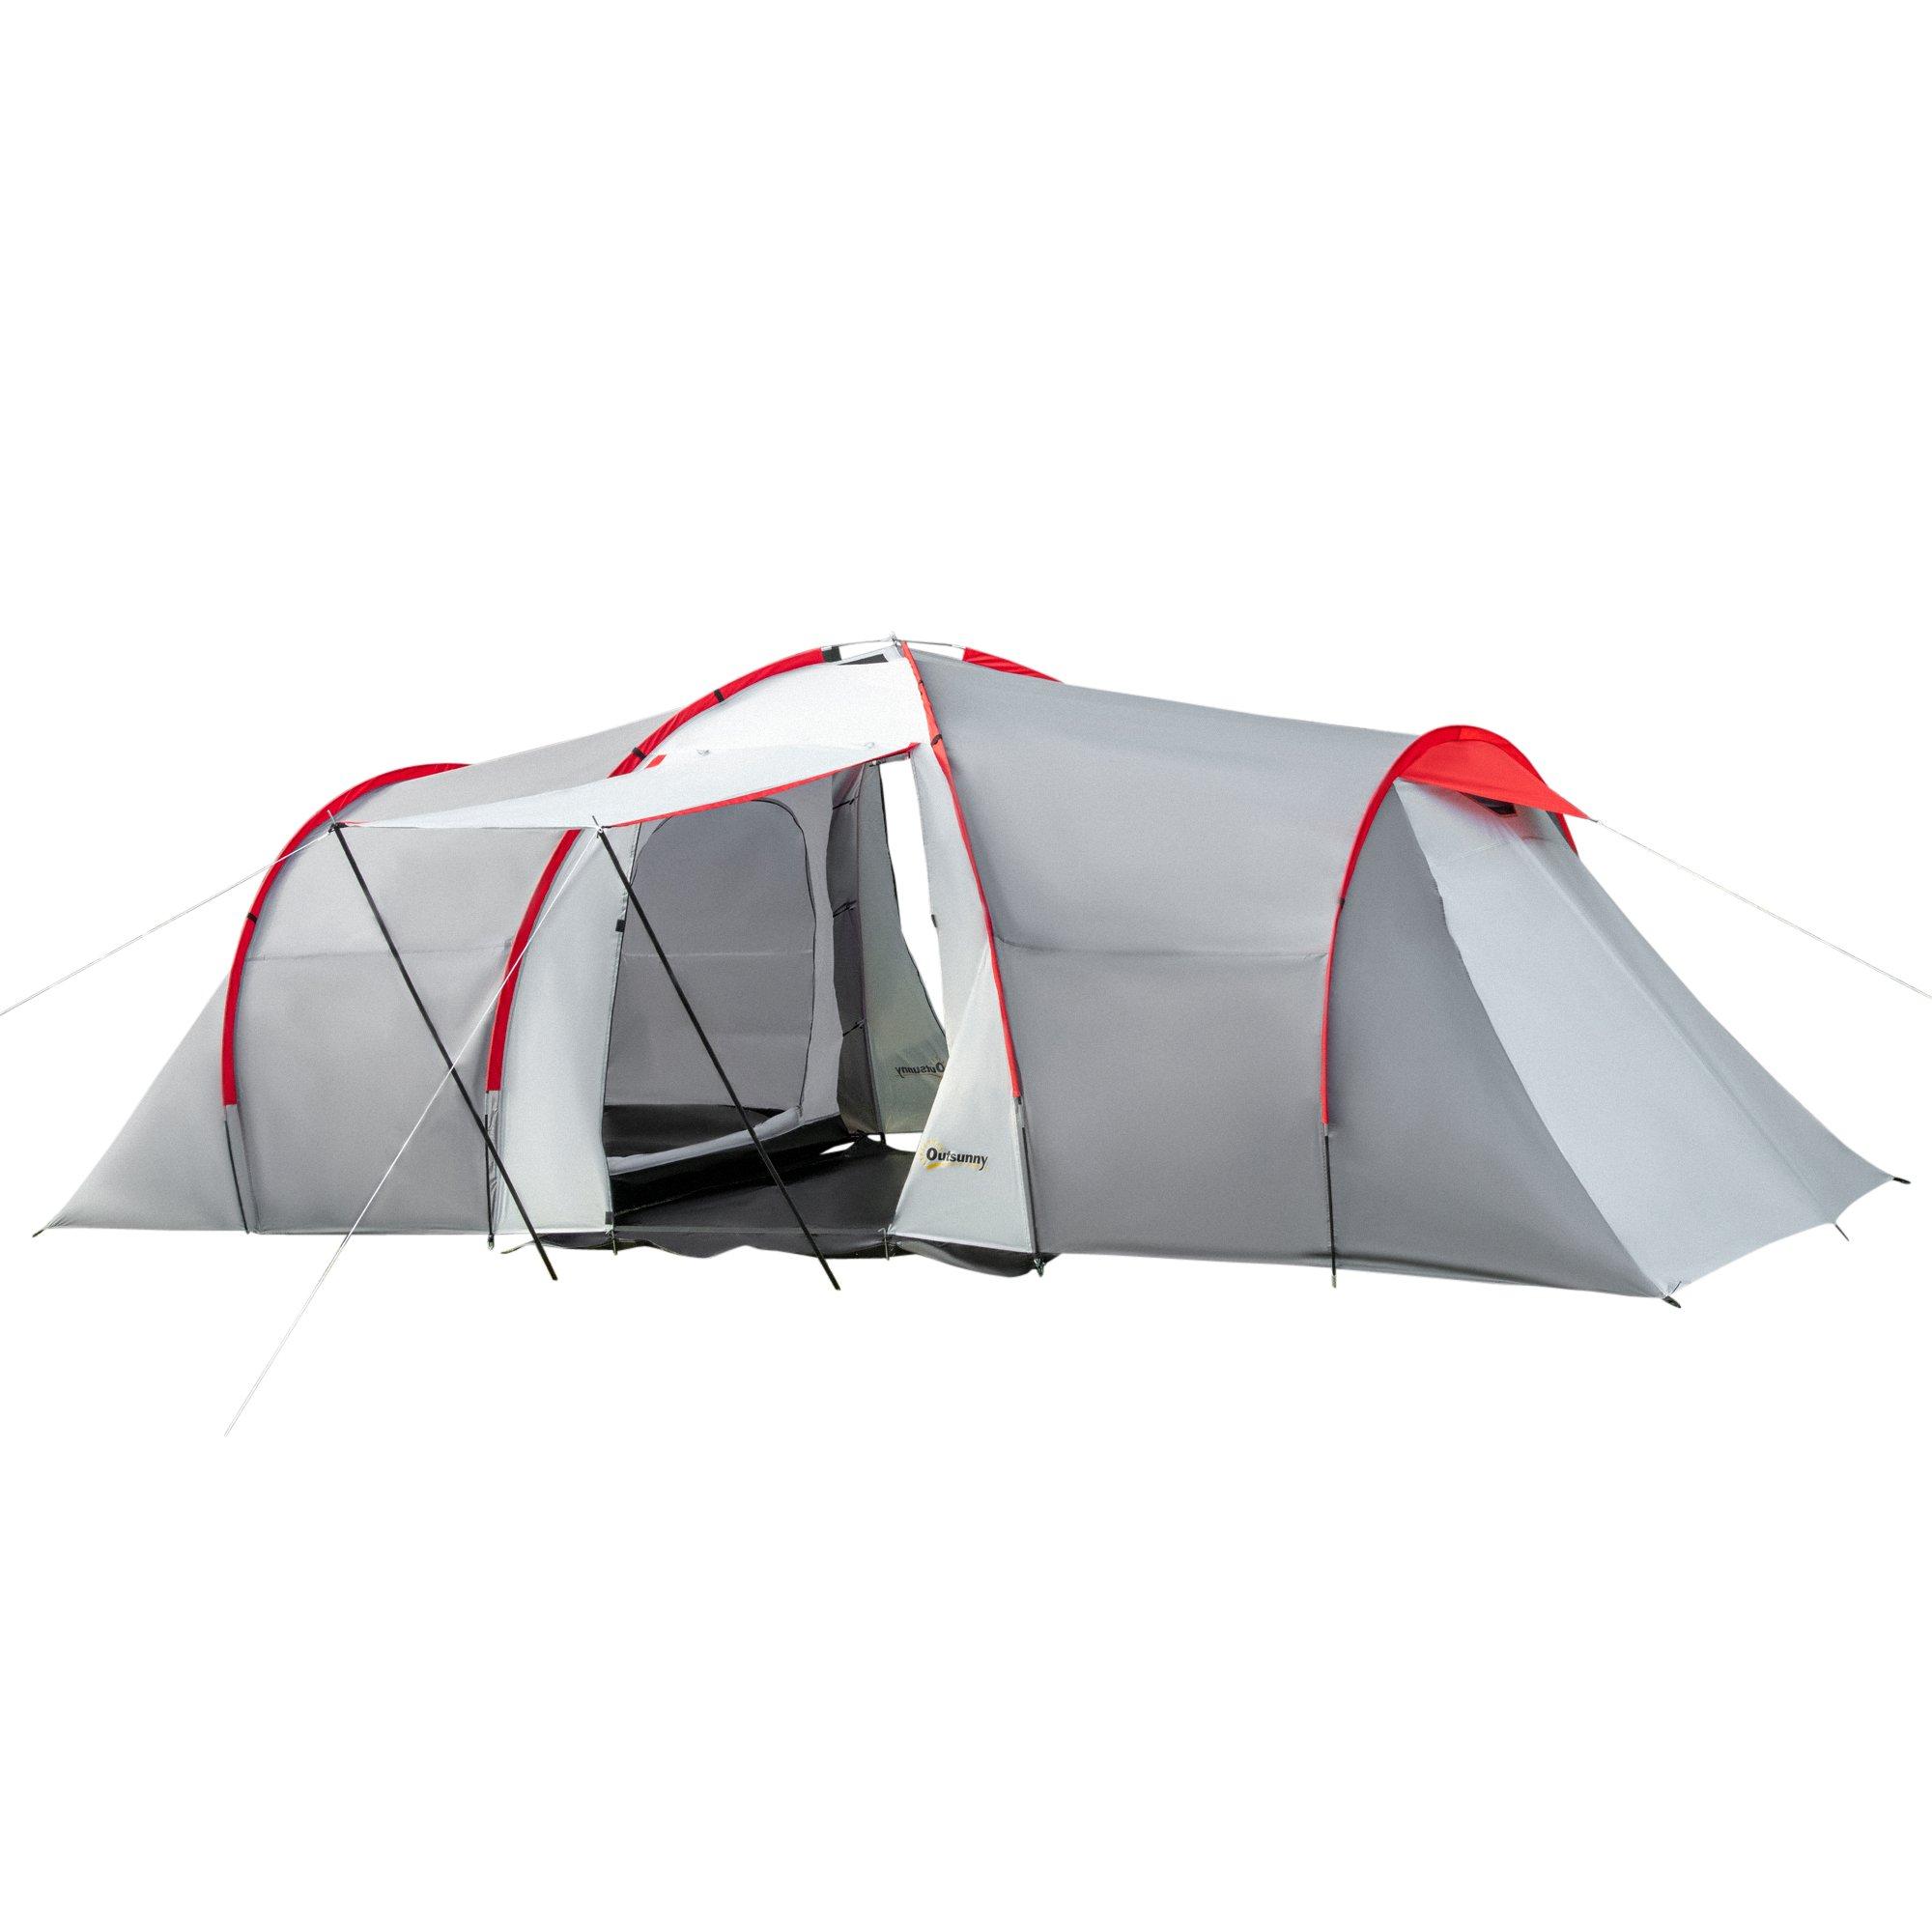 4-6 Man Tunnel Tent, Camping Tent with 2 Bedroom, Living Area and Porch